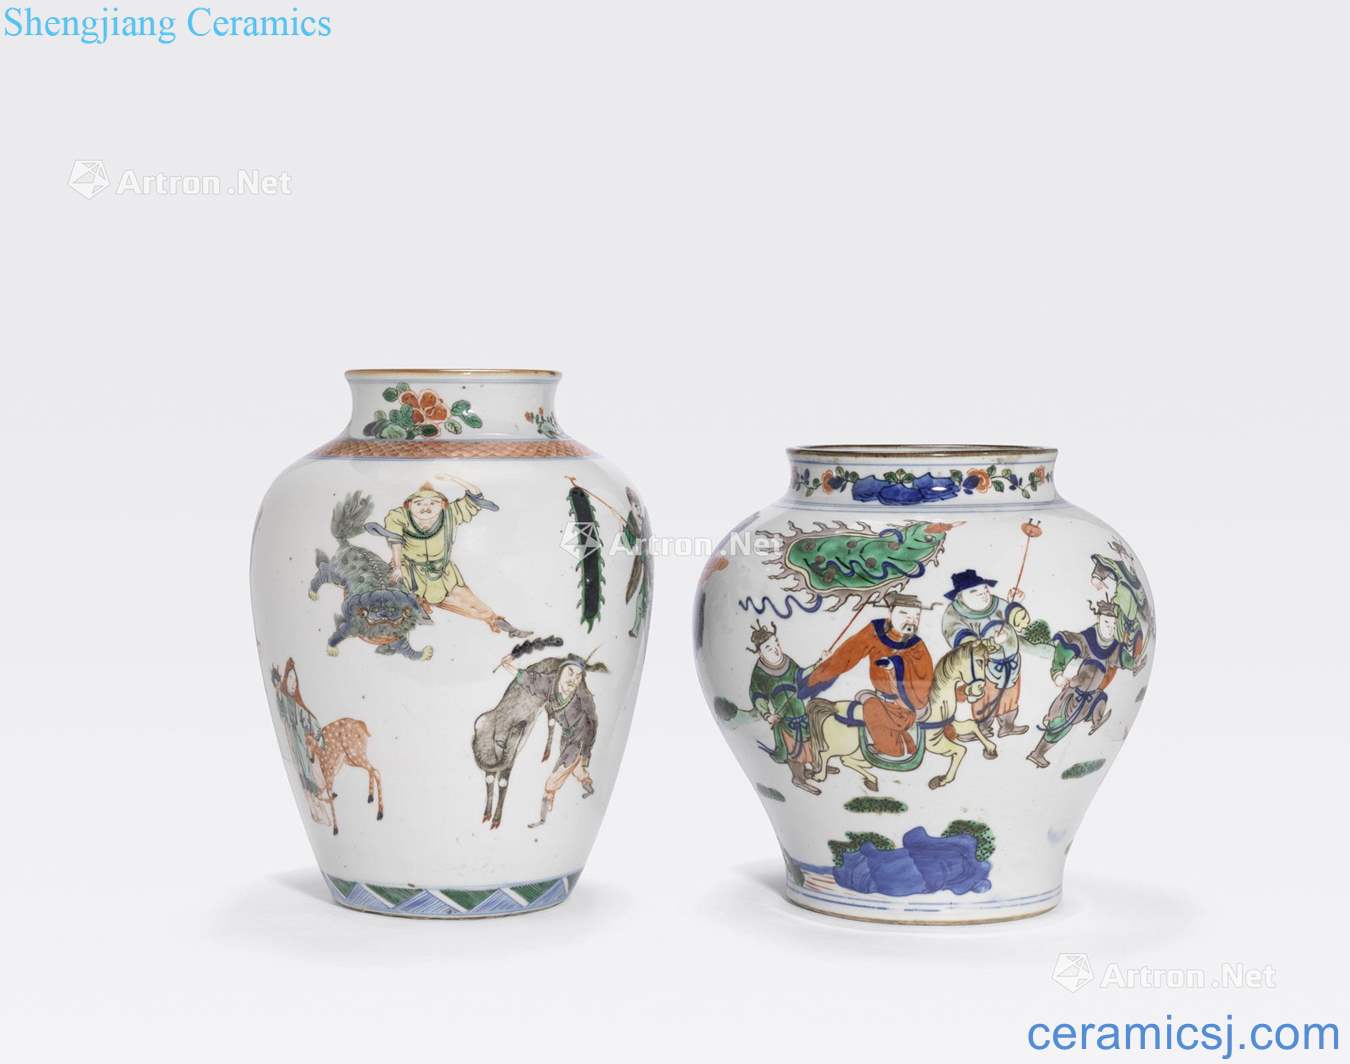 Newest the Qing/Republic period TWO WUCAI ENAMELED JARS WITH FIGURAL DECORATION